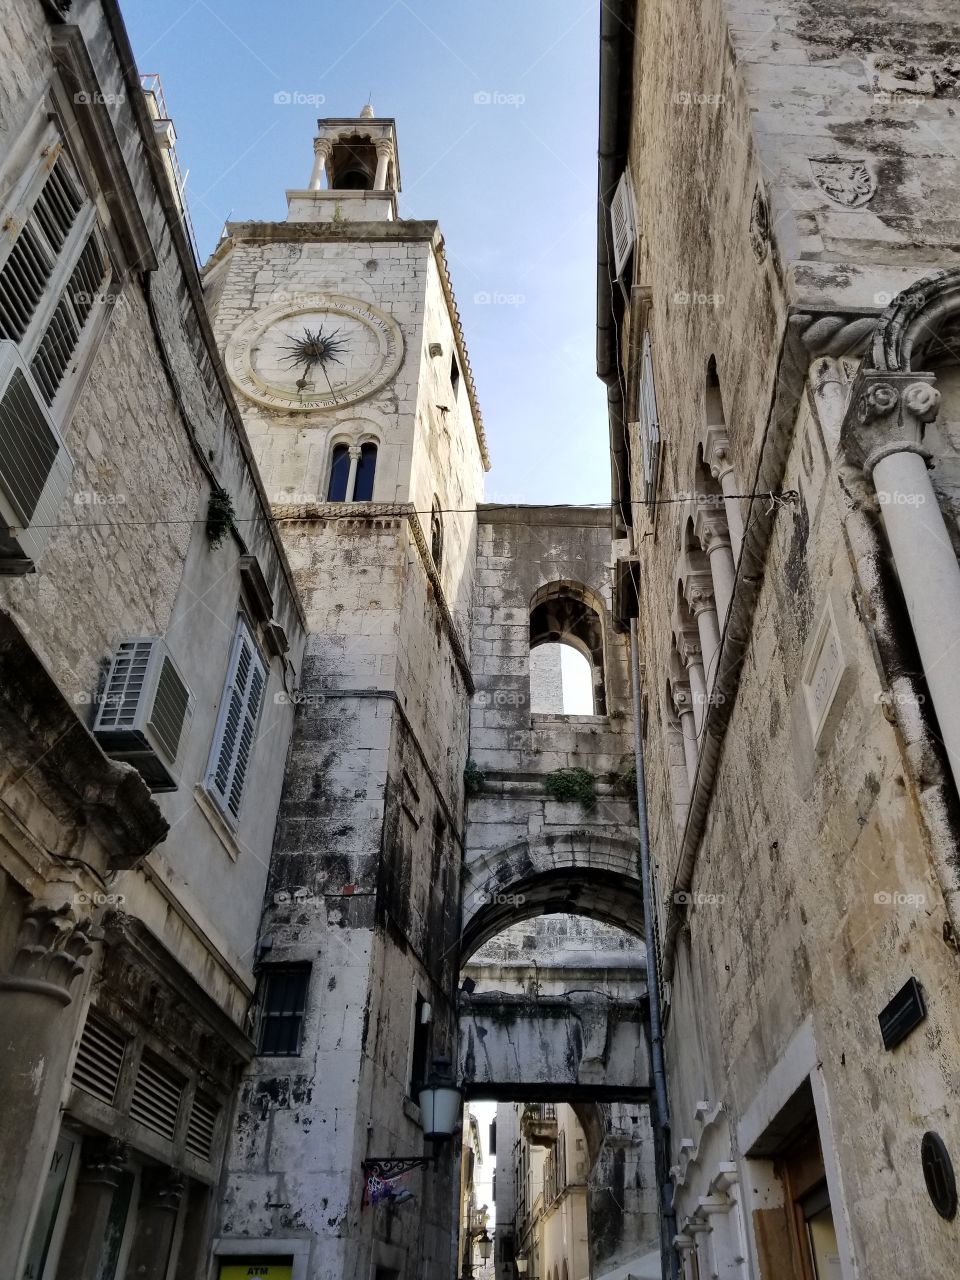 Palace of Diocletian, Split, Croatia (Medieval bell tower)